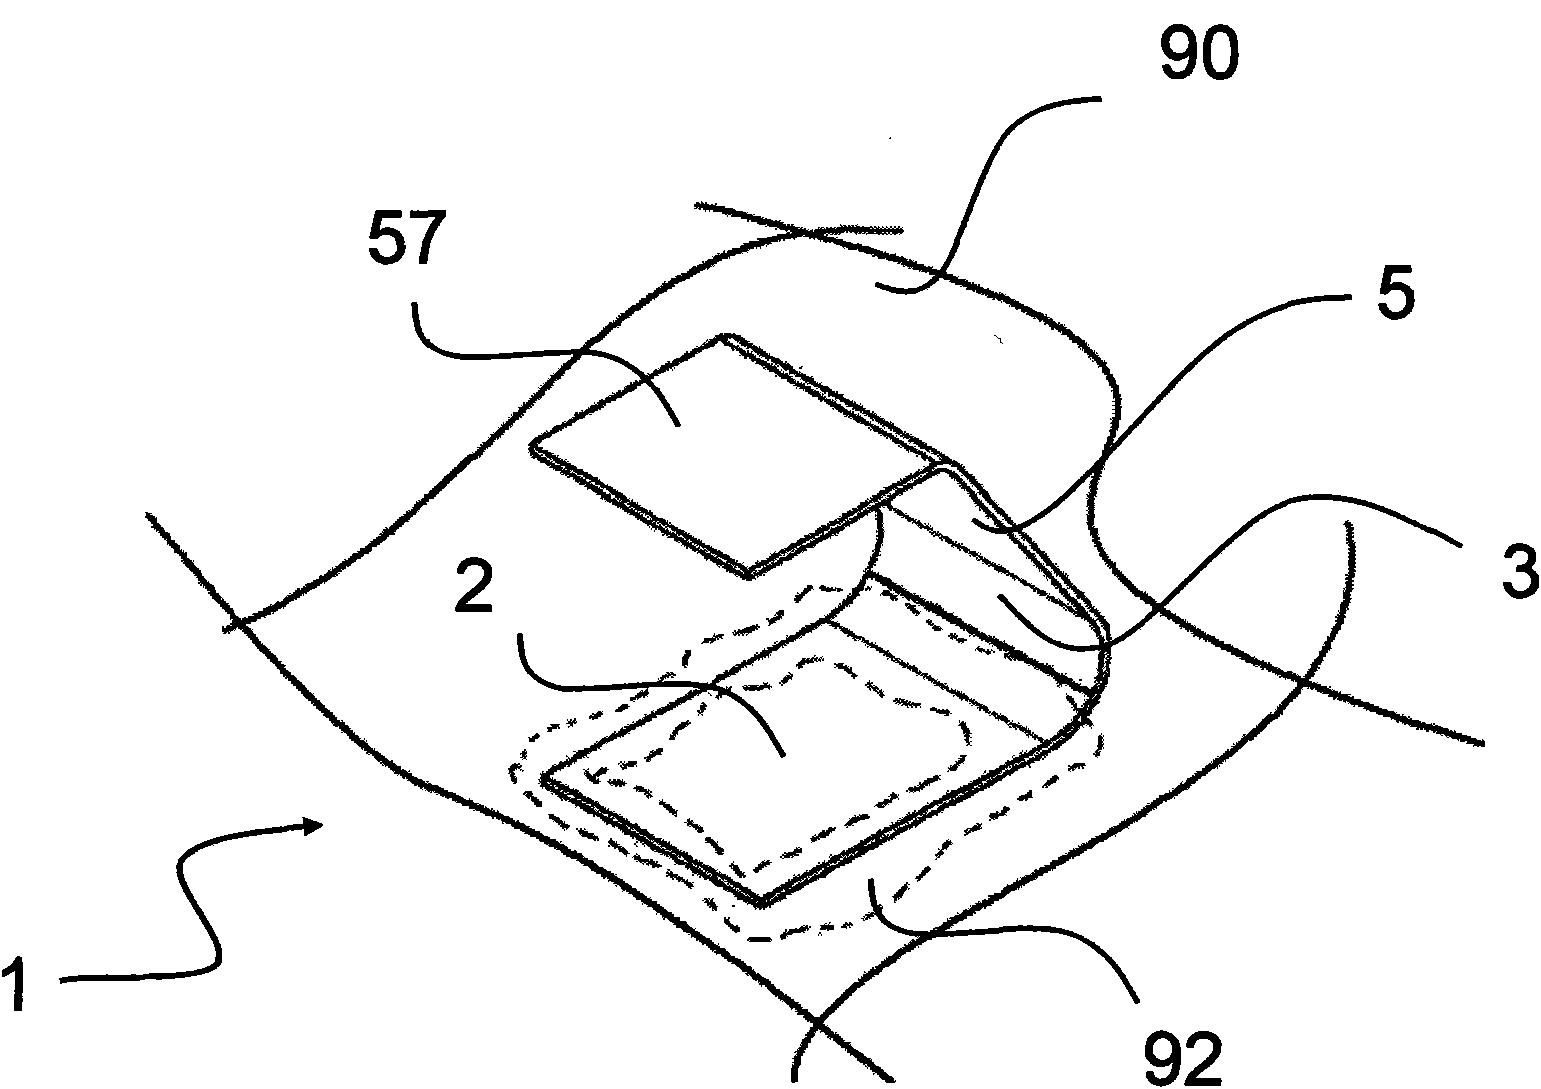 Surface mounting elastic sheet with supporting section and blocking adsorption section